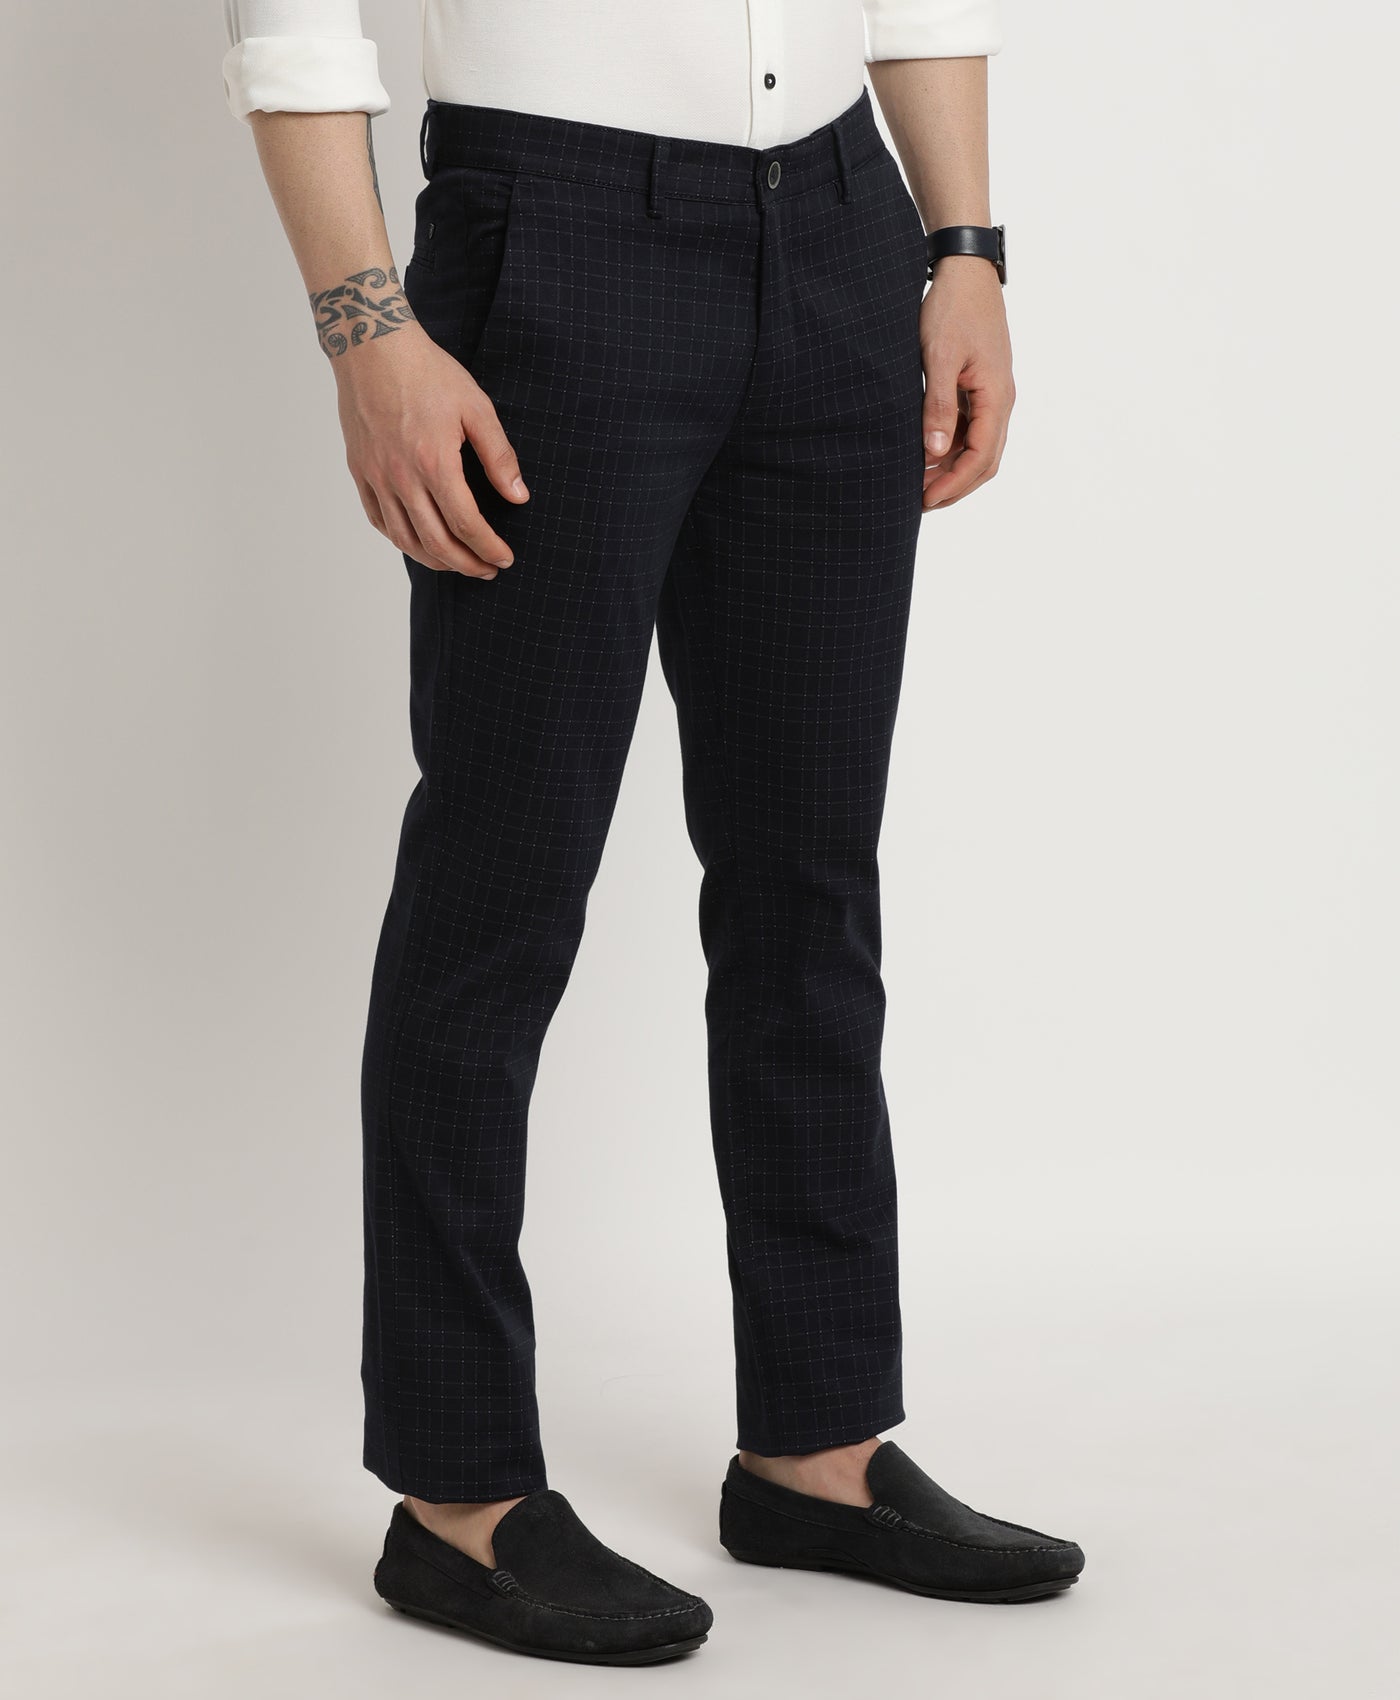 Cotton Stretch Navy Blue Checkered Narrow Fit Flat Front Casual Trouser